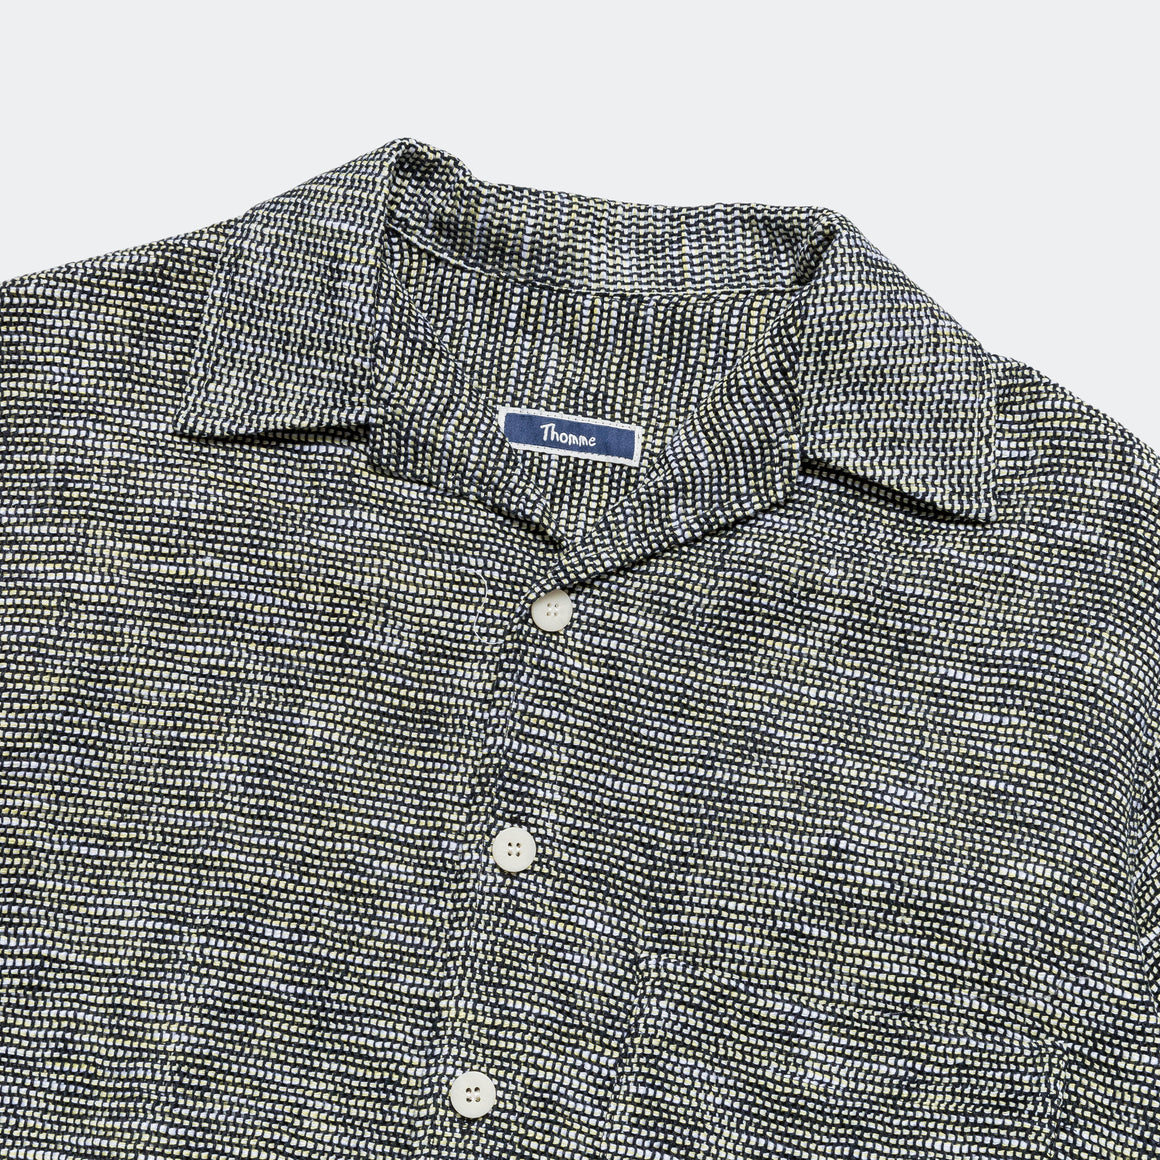 Thomme - Camp Shirt Woven - White/Black - UP THERE